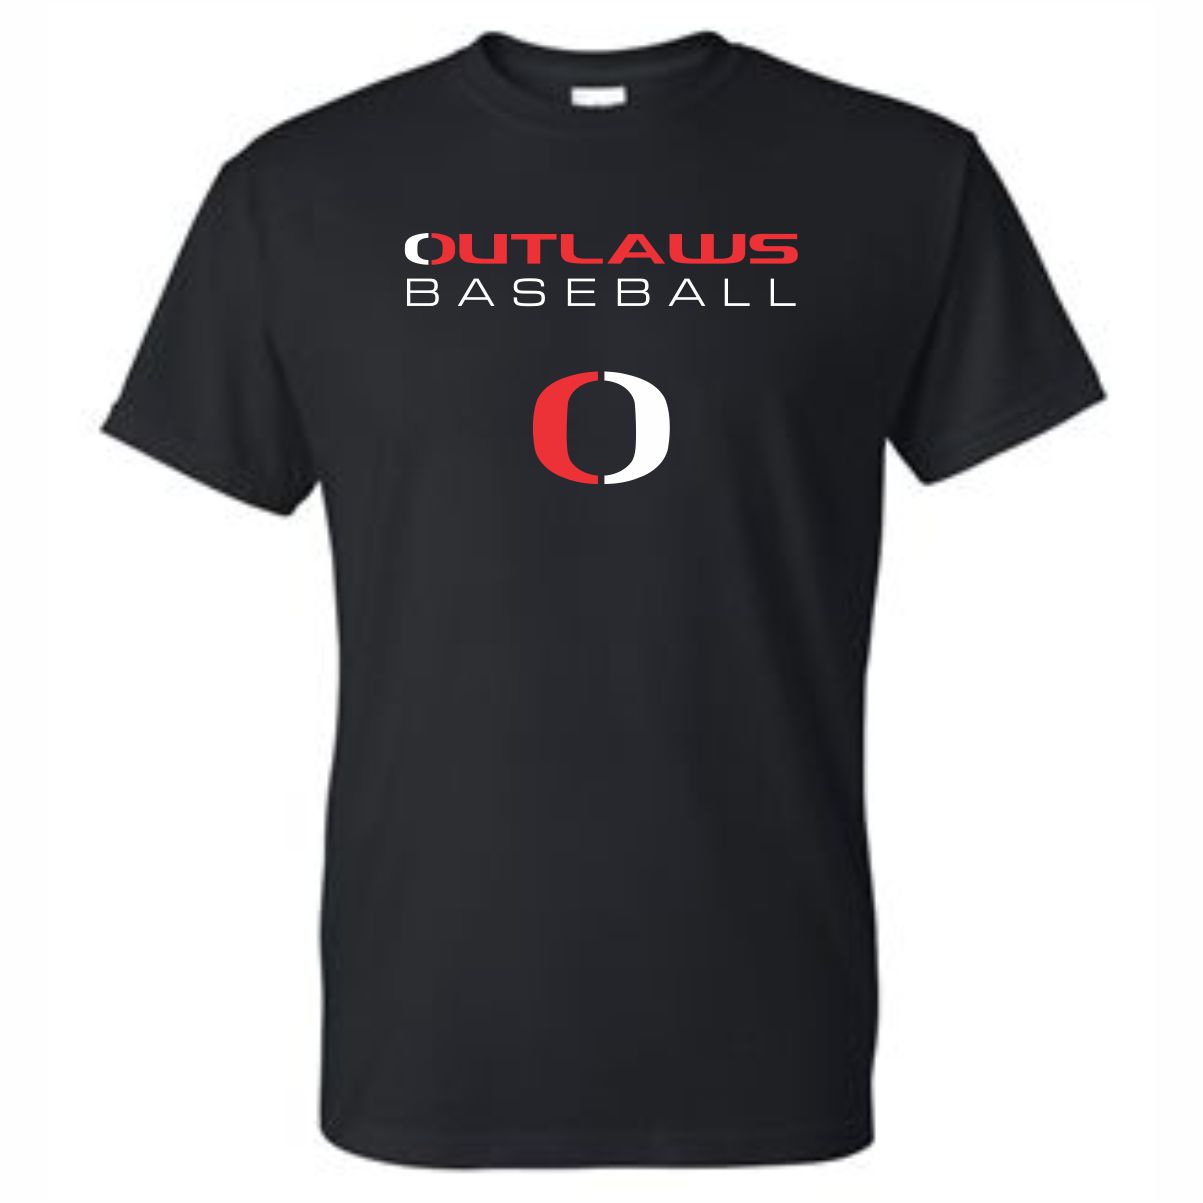 Marengo Outlaws Travel Baseball Youth and Adult T-Shirt